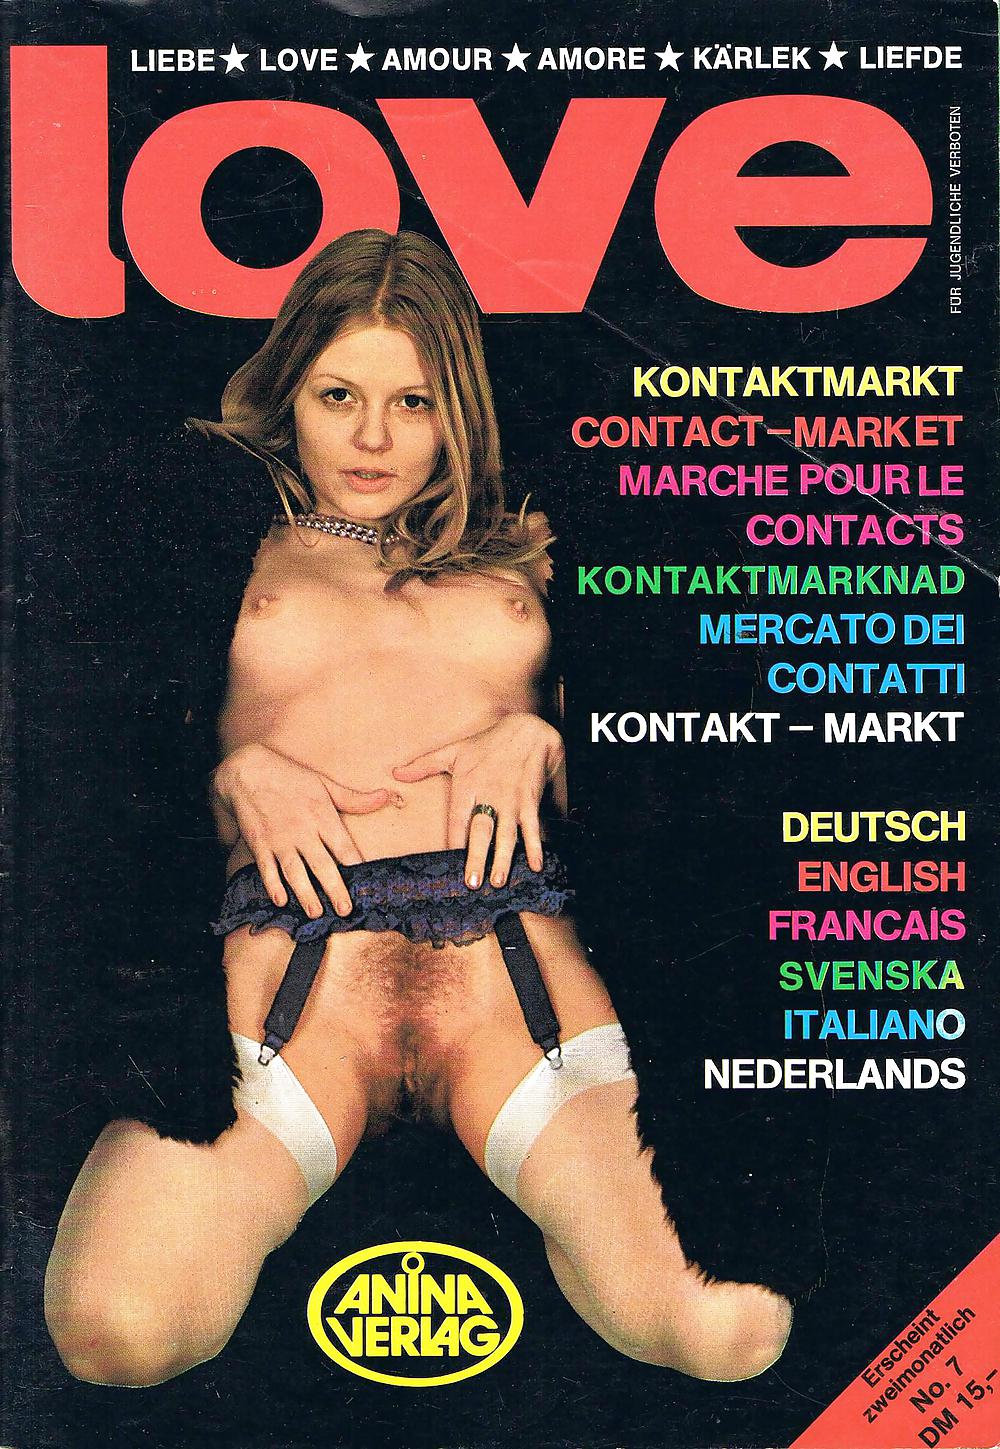 Anne Magle danish pornstar from the 70s